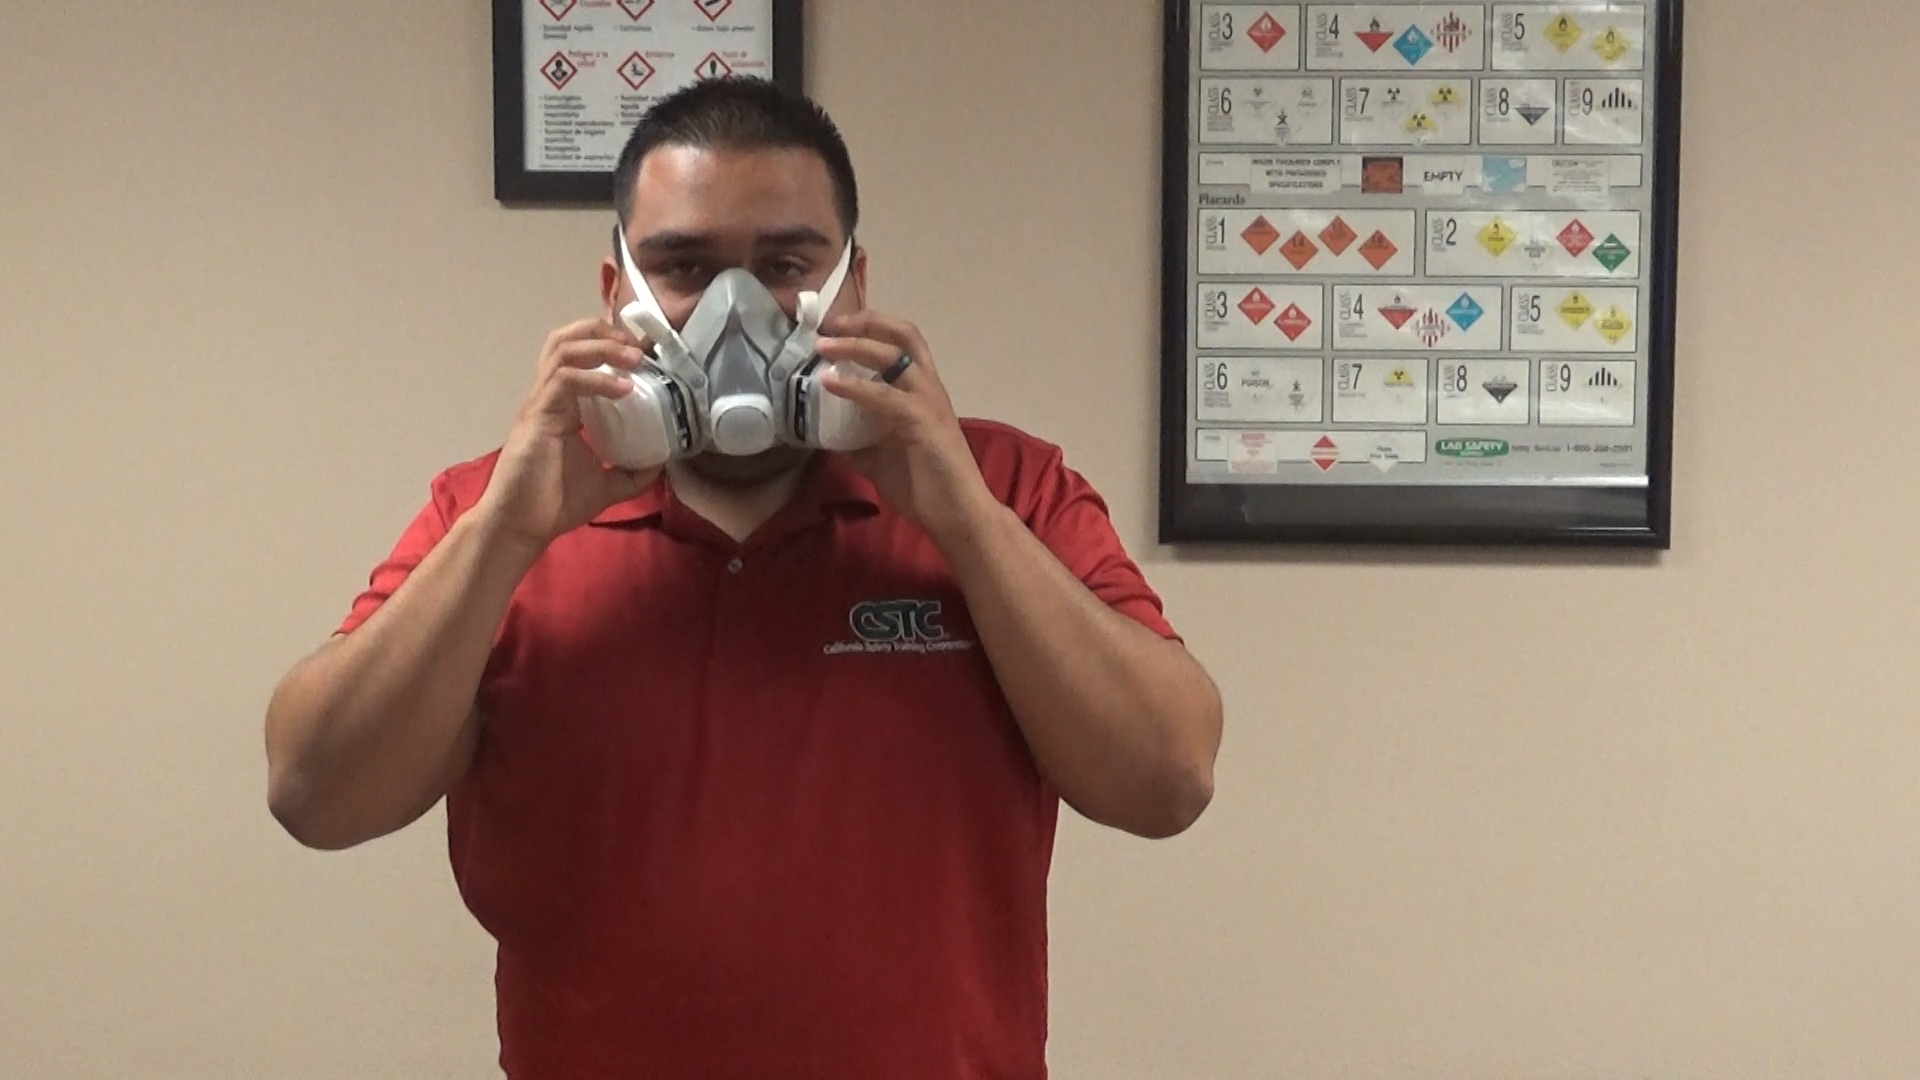 Rey, a Trainer from CSTC showing us how to do a Respirator Take apart and cleaning.